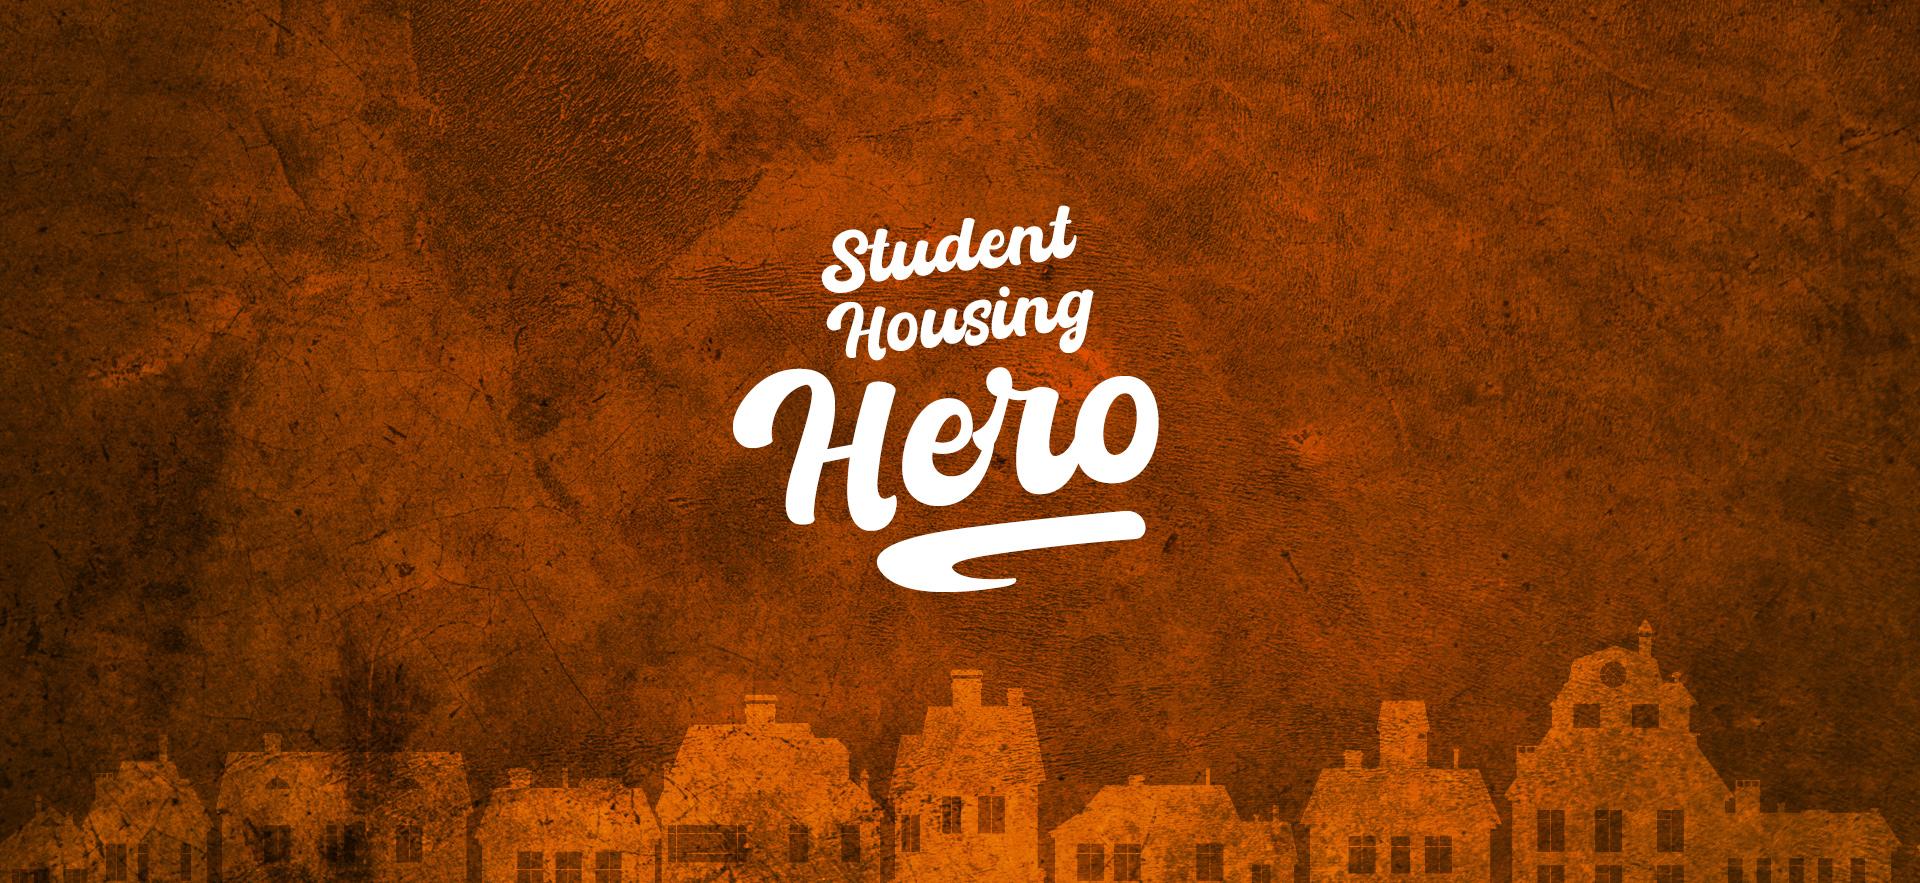 Orange background showing illustrative skyline of buildings with white cursive text Student Housing Hero